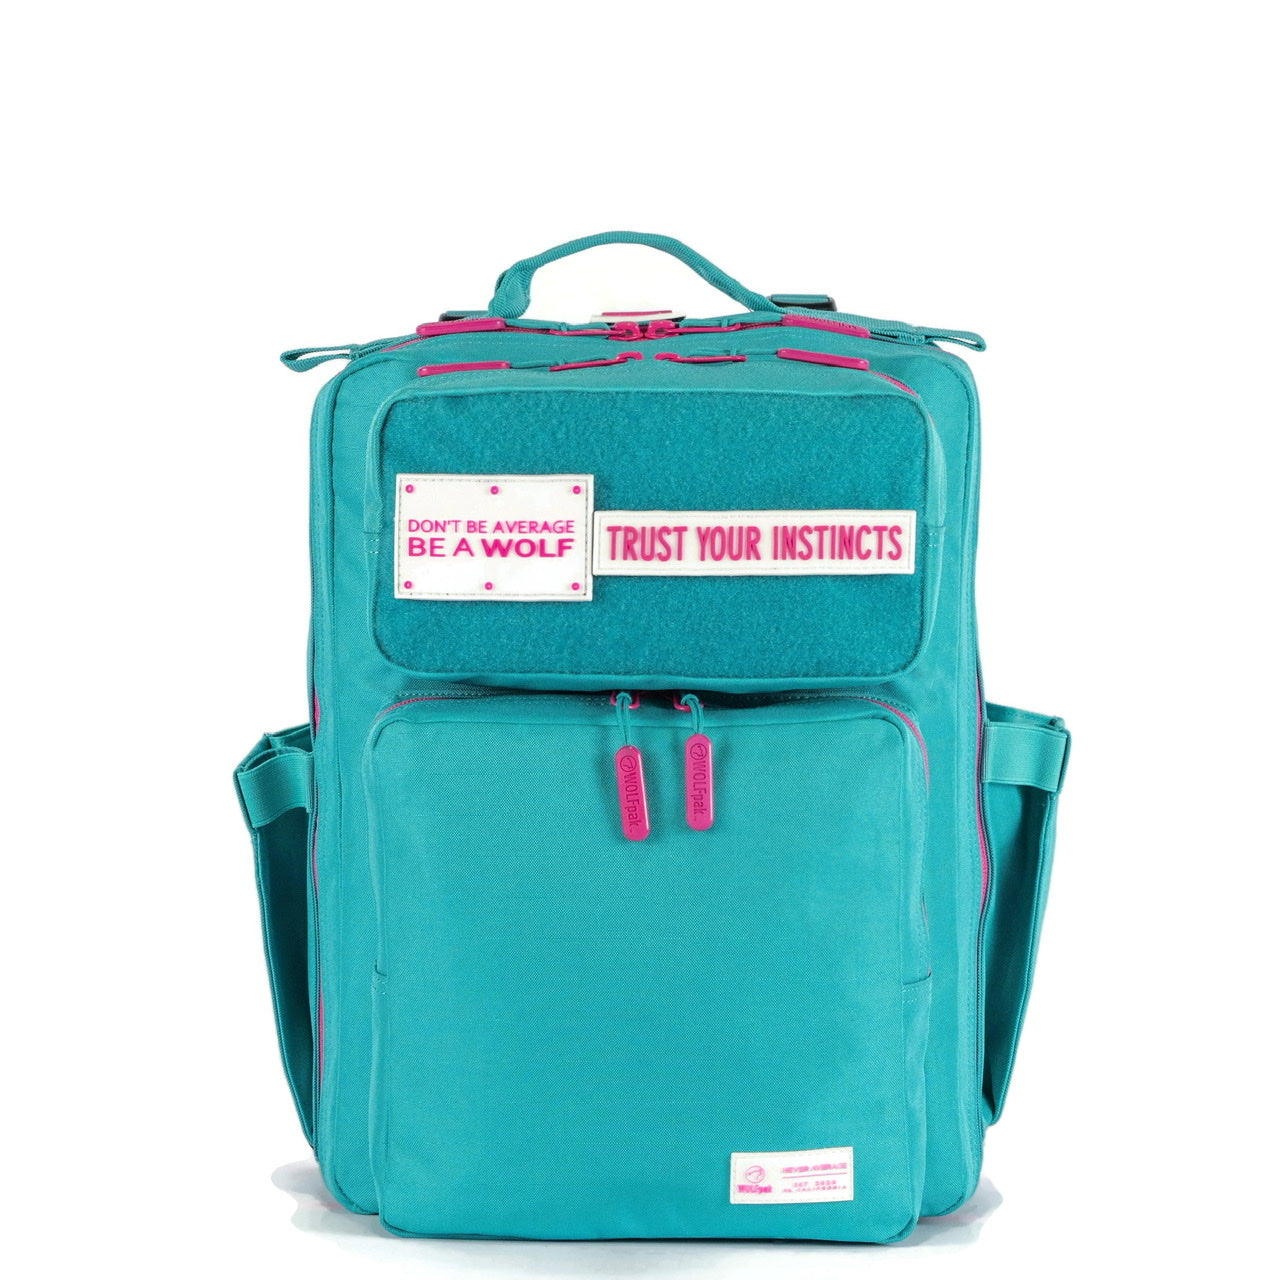 15L Backpack Miami Vice